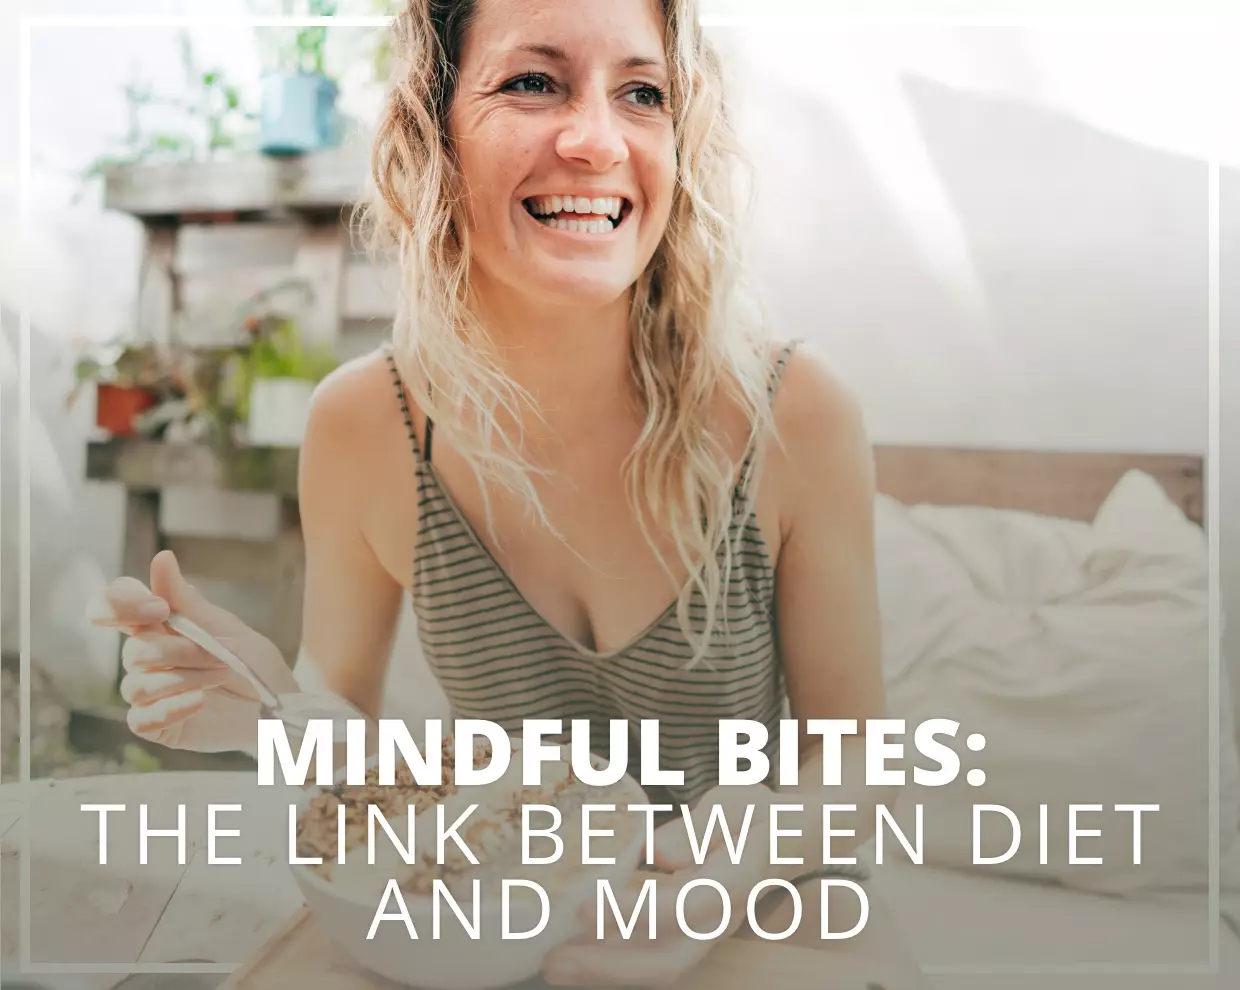 Mindful Bites: The Link Between Diet and Mood